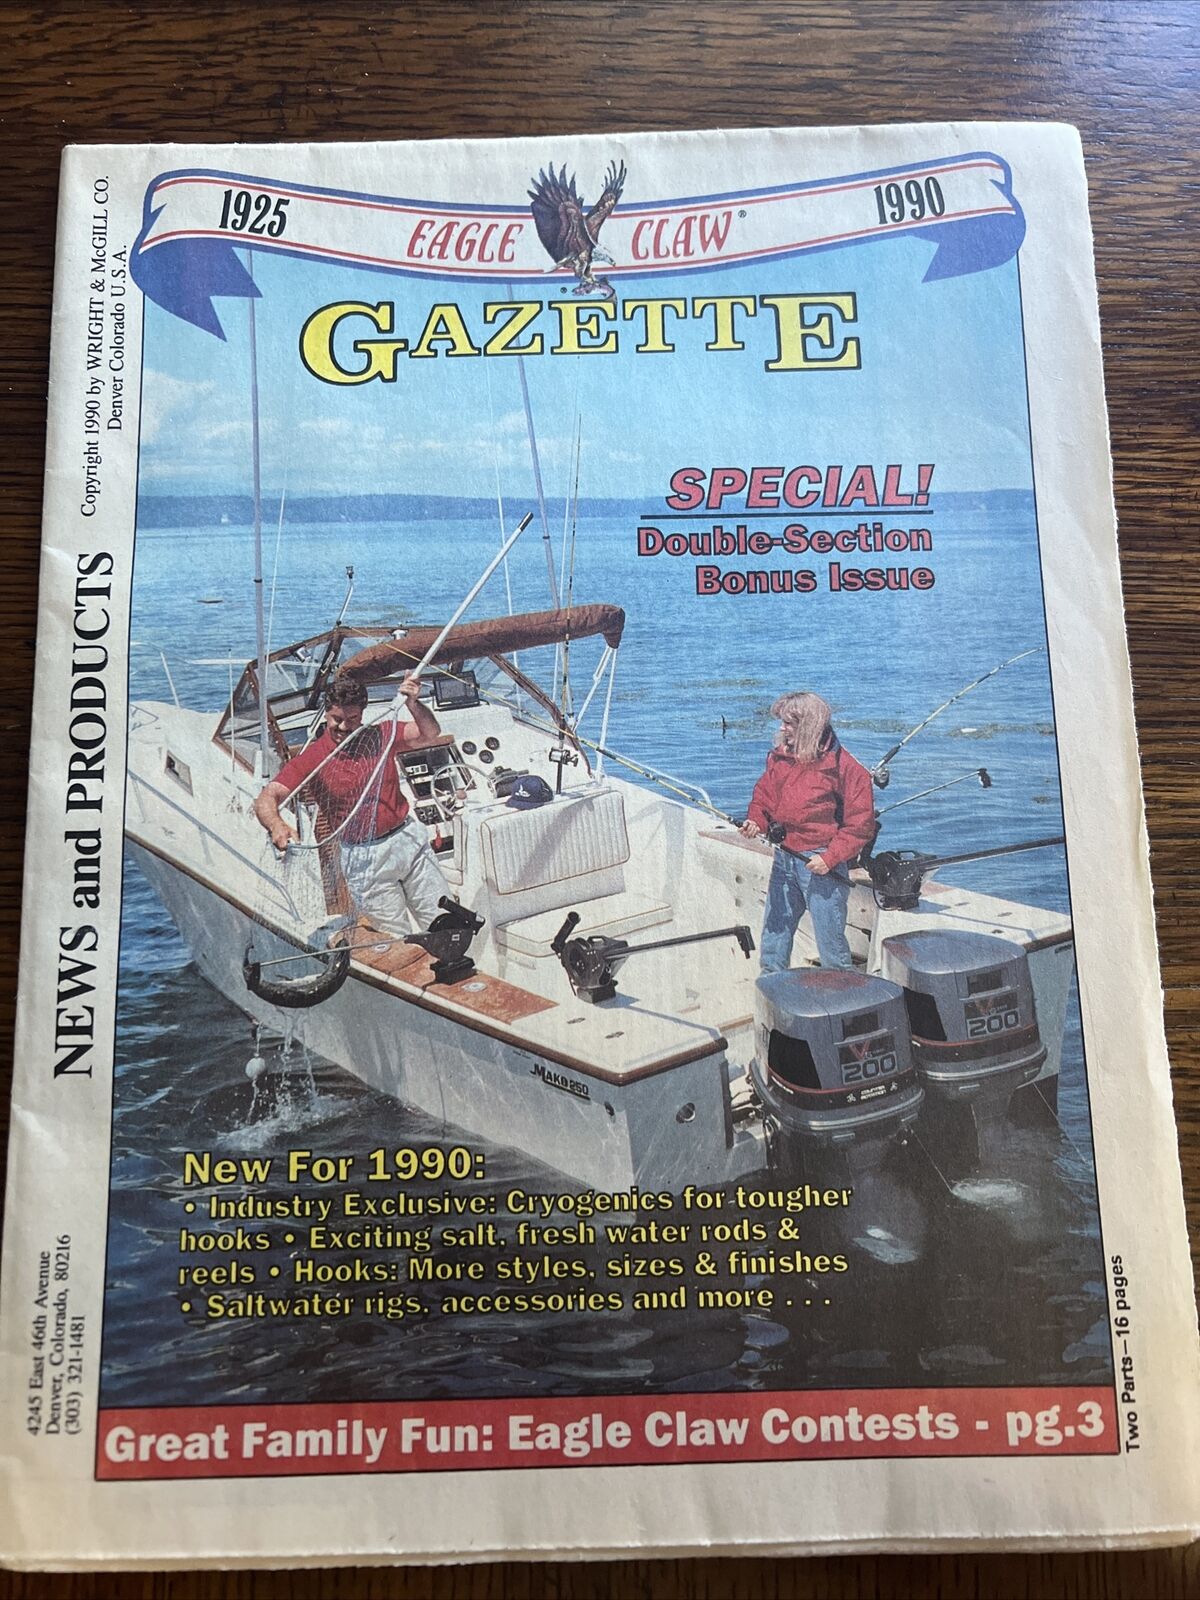 Rare - Eagle Claw Fishing Gazette 1990 News & Products excellent condition